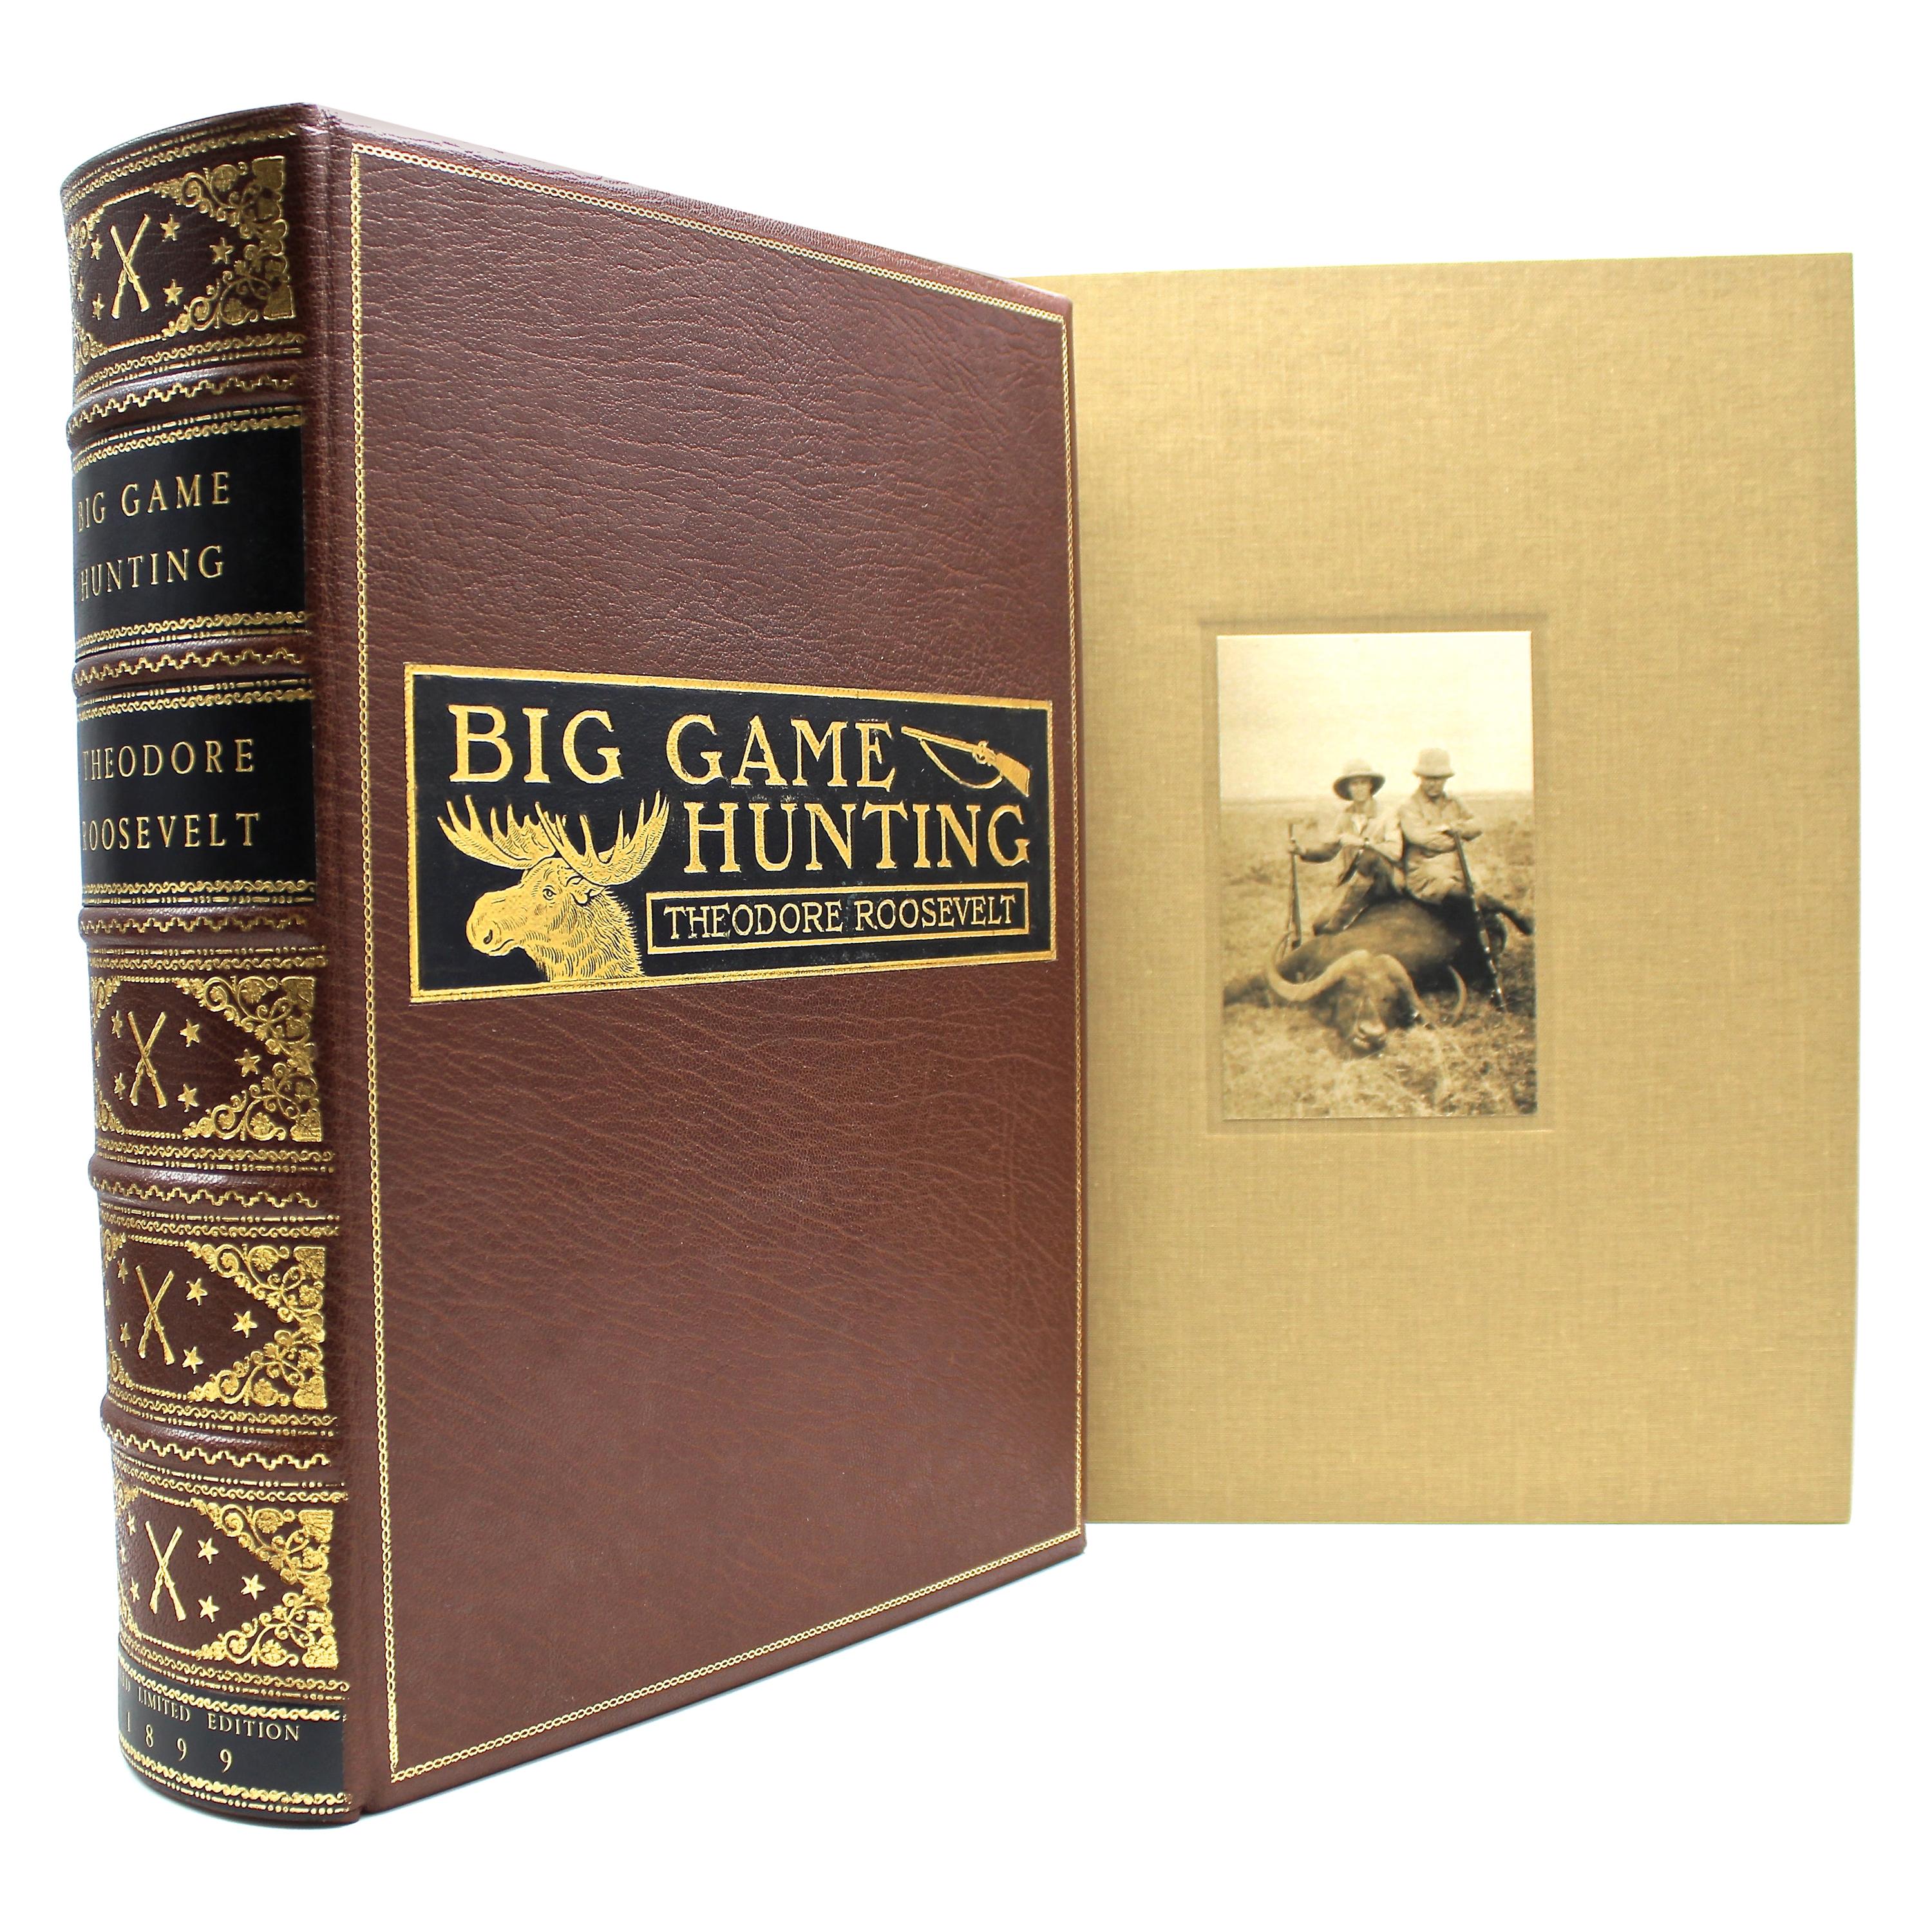 Big Game Hunting by Theodore Roosevelt, Signed First Limited Edition 762 of 1000